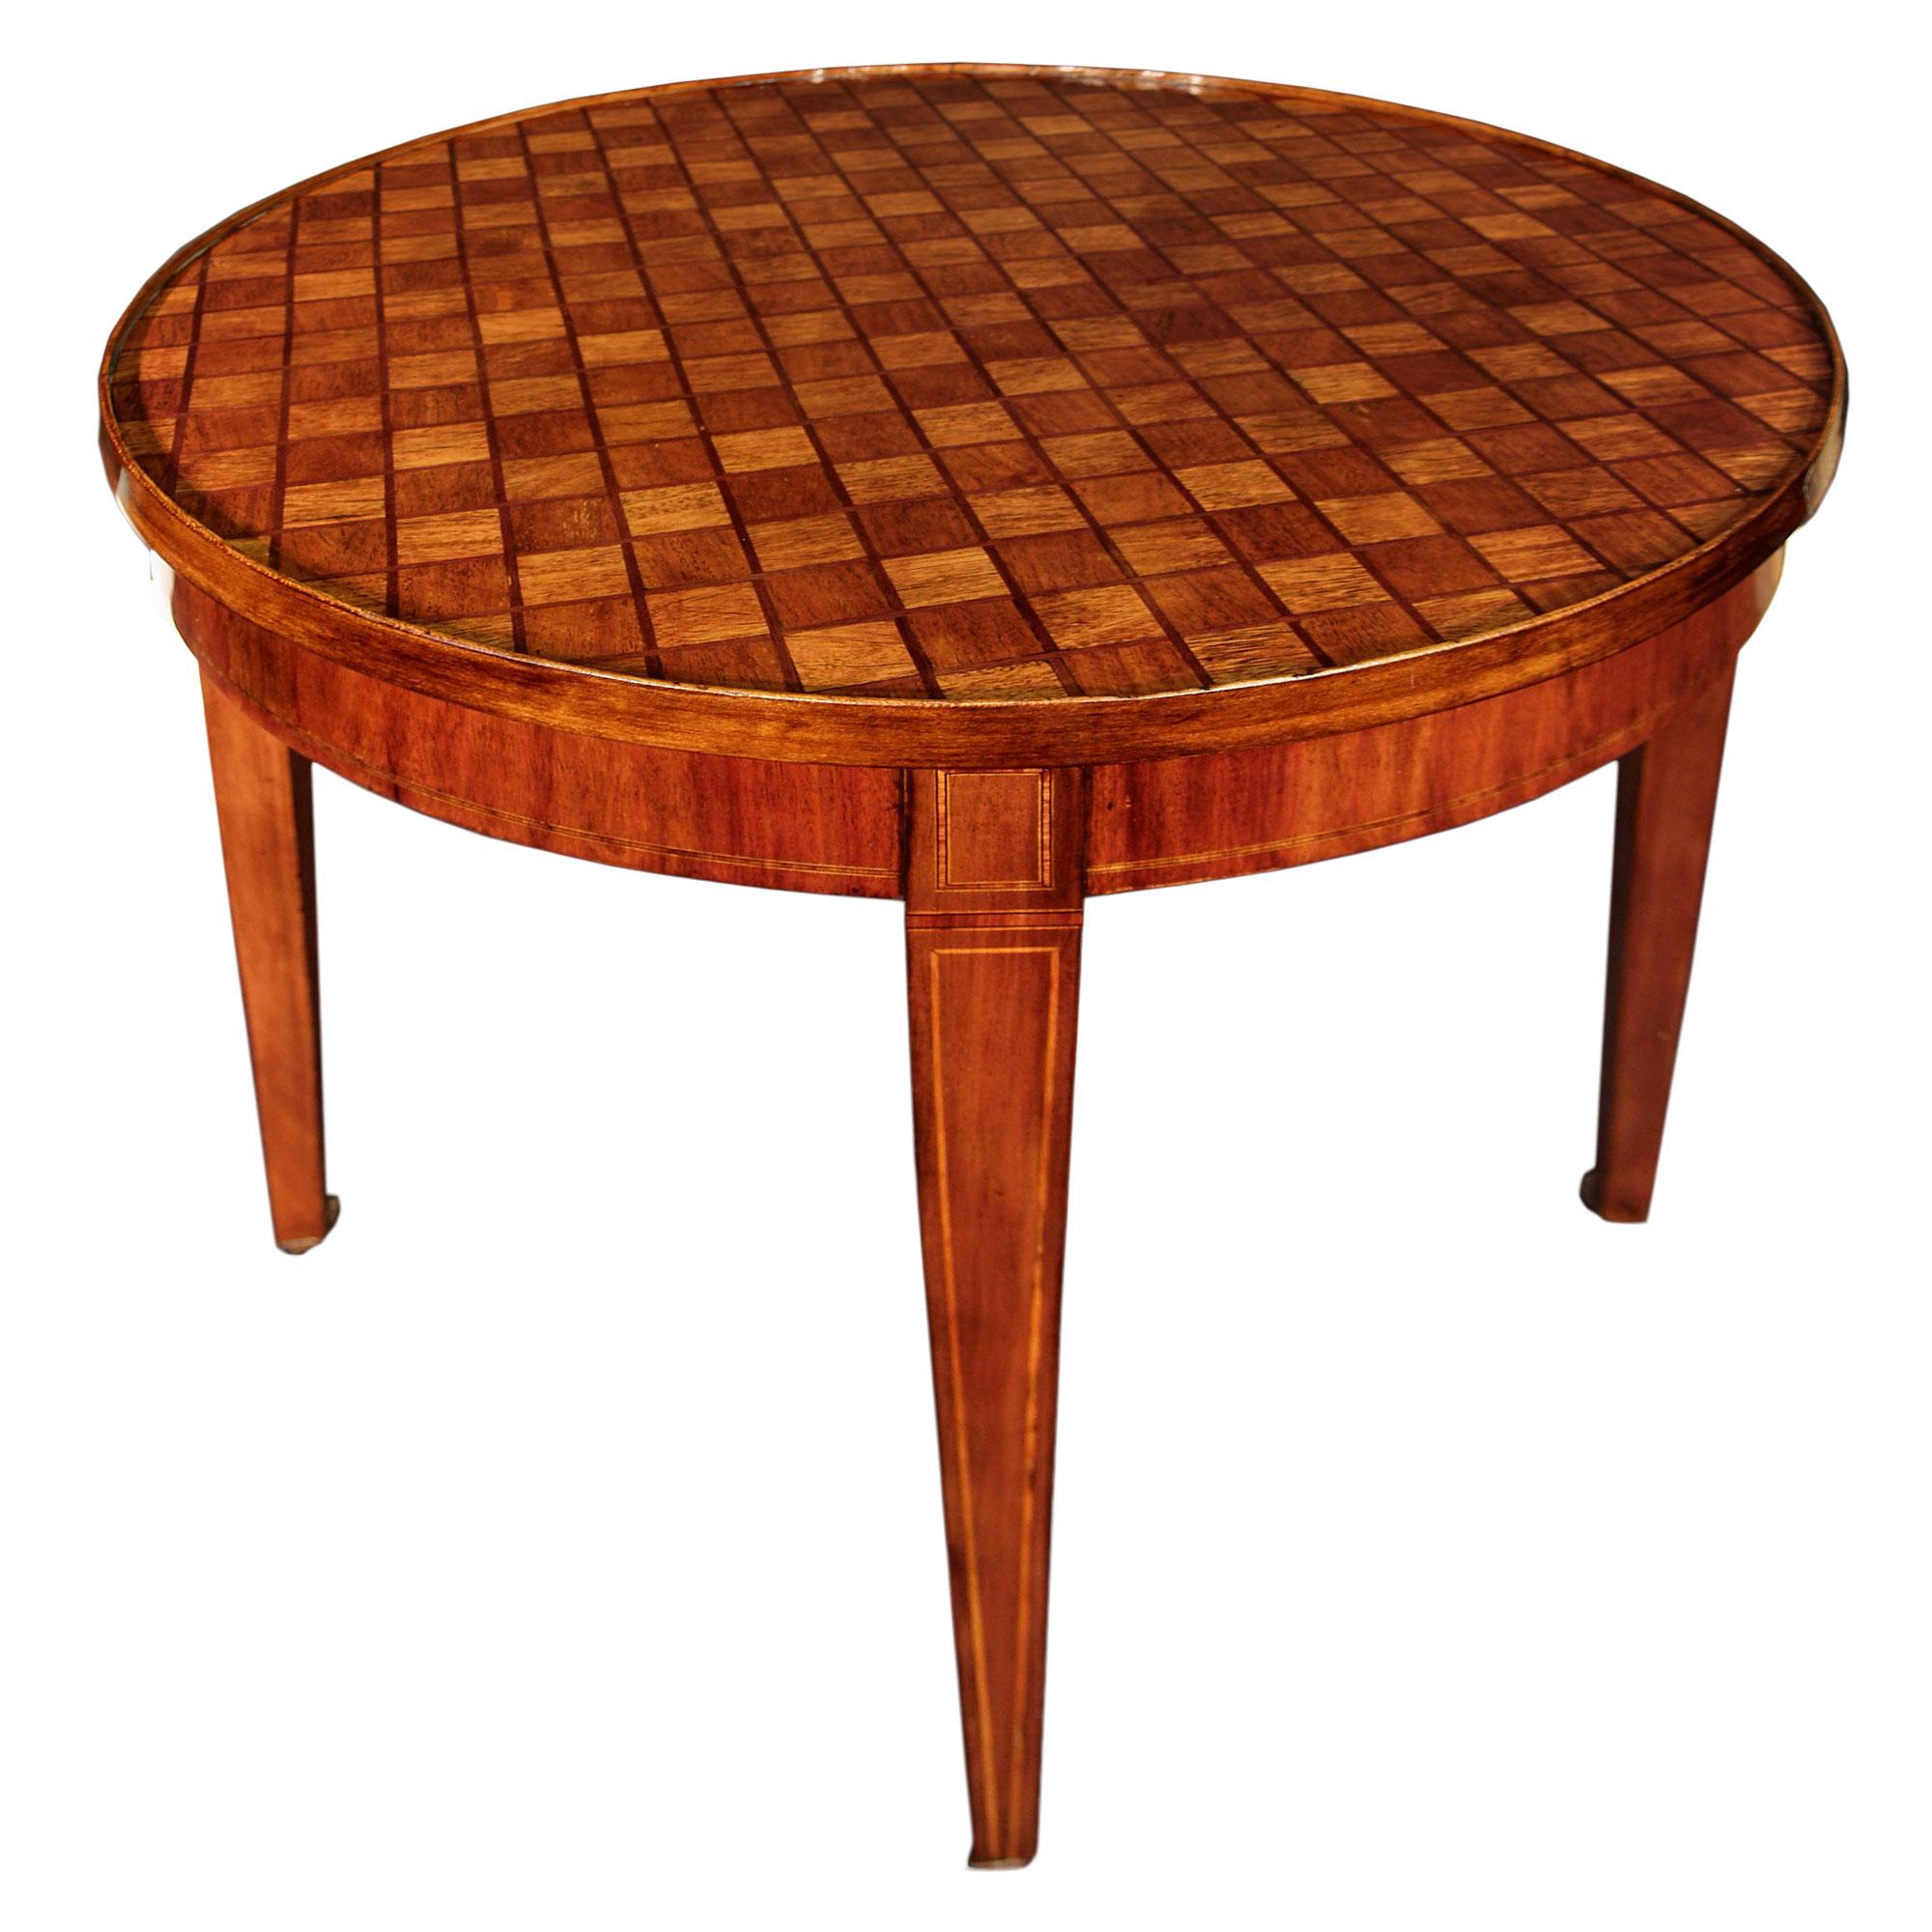 A French Louis XVI st. 19th century round tulipwood parquetry flip top center table. The table with square straight tapered legs raised by casters. The drum like apron is inlaid with tulipwood and boxwood filettes. The top with an elegant parquetry